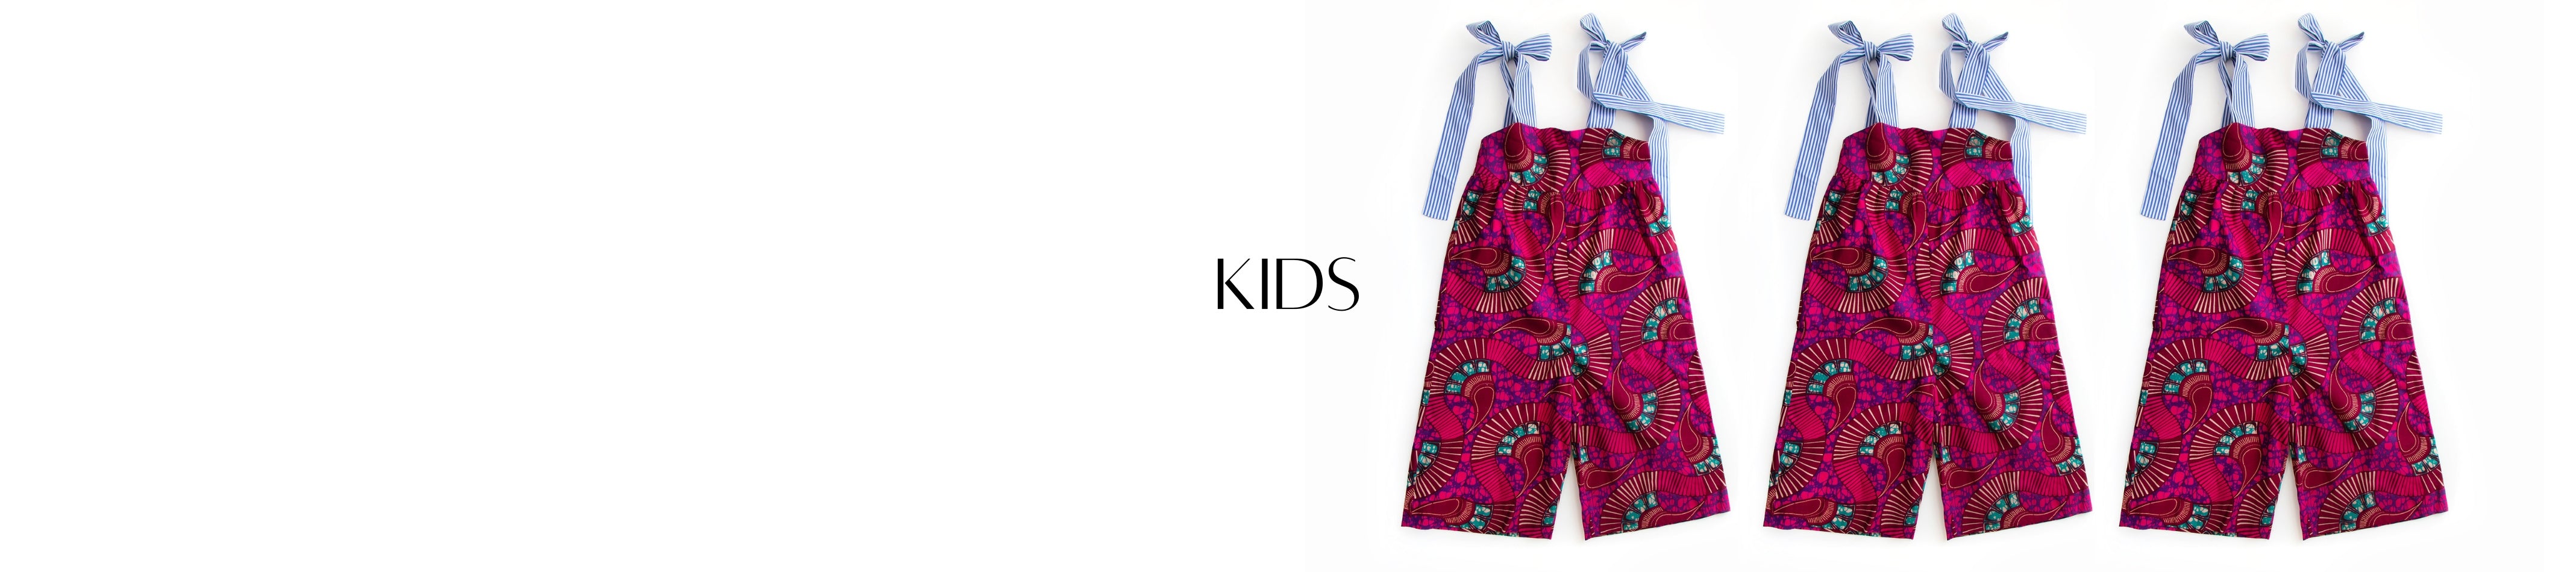 Chen Burkett New York kids jumpsuit in all over magenta and burgundy batik print, featuring blue and white stripe wide shoulders ties.